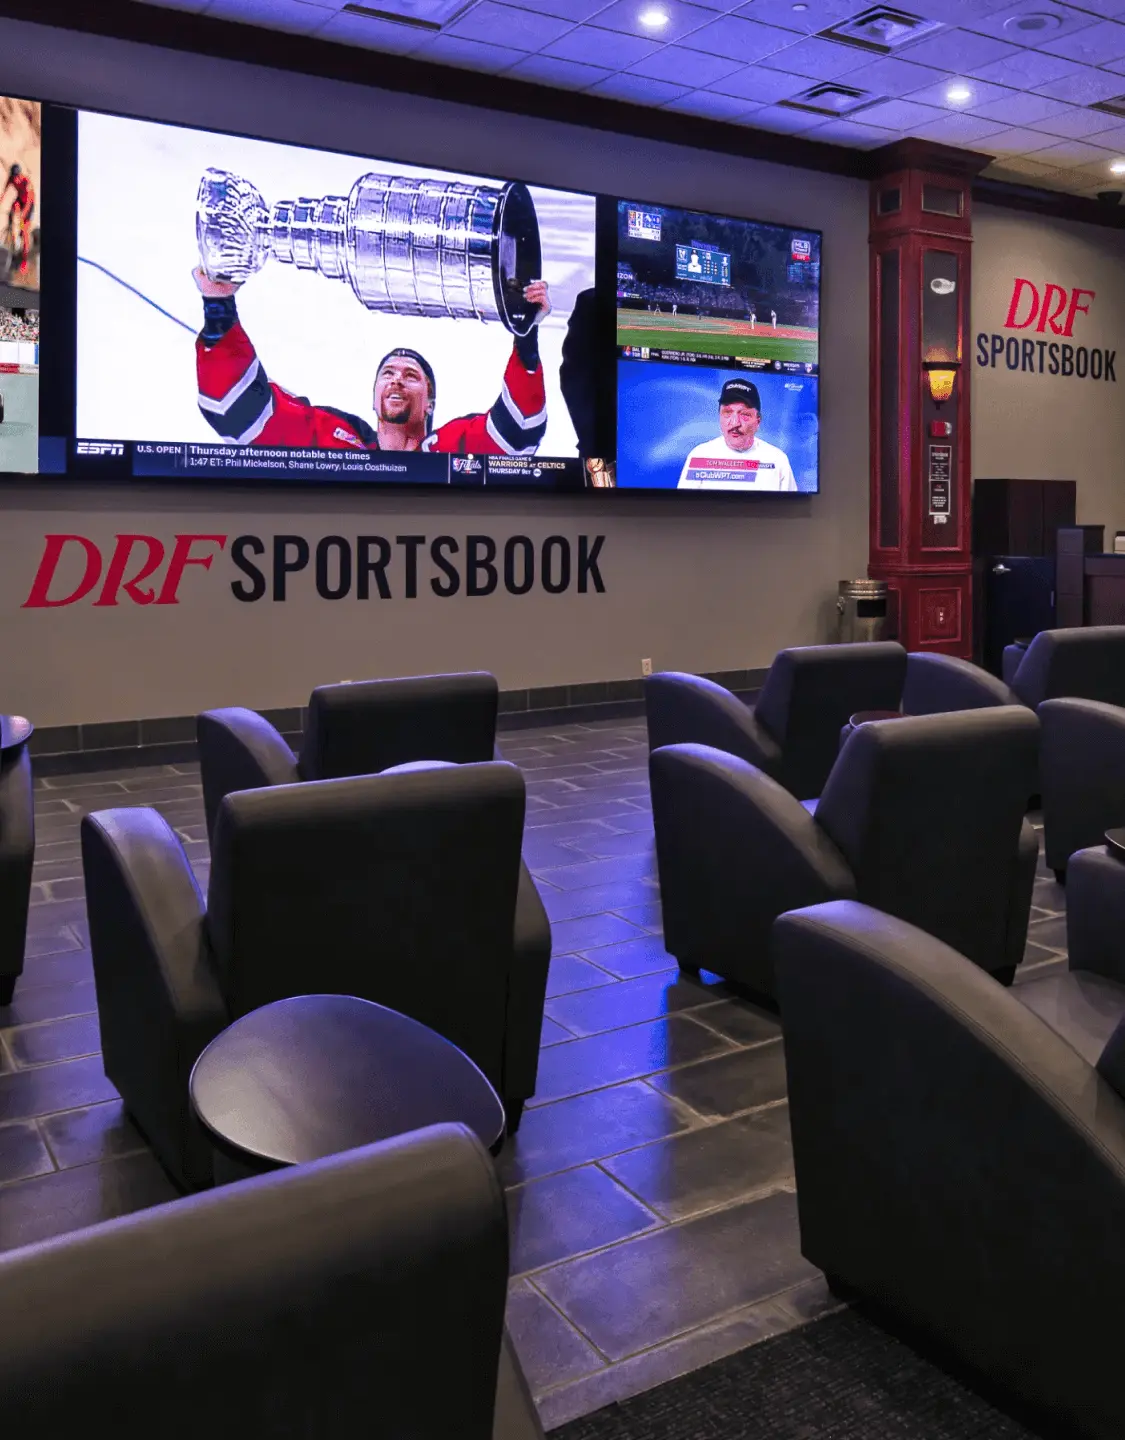 DRF Sportsbook Seating Area - Mobile